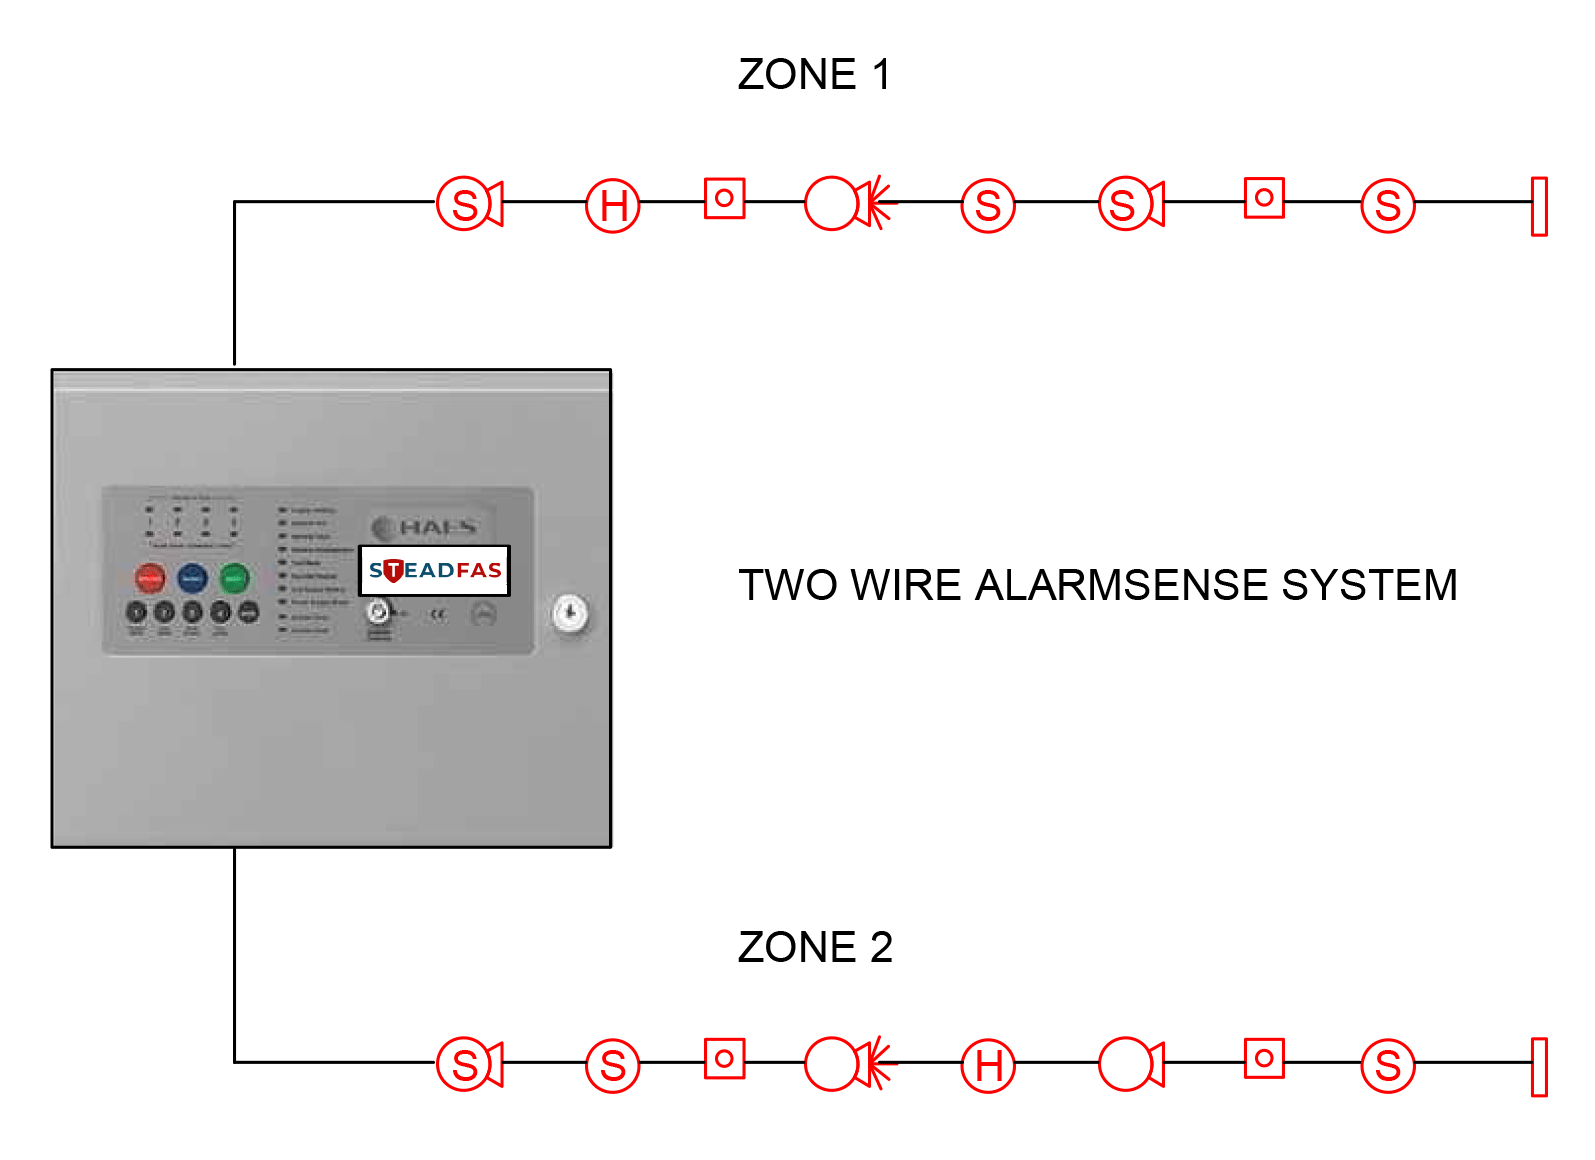 Two Wire Alarmsense System